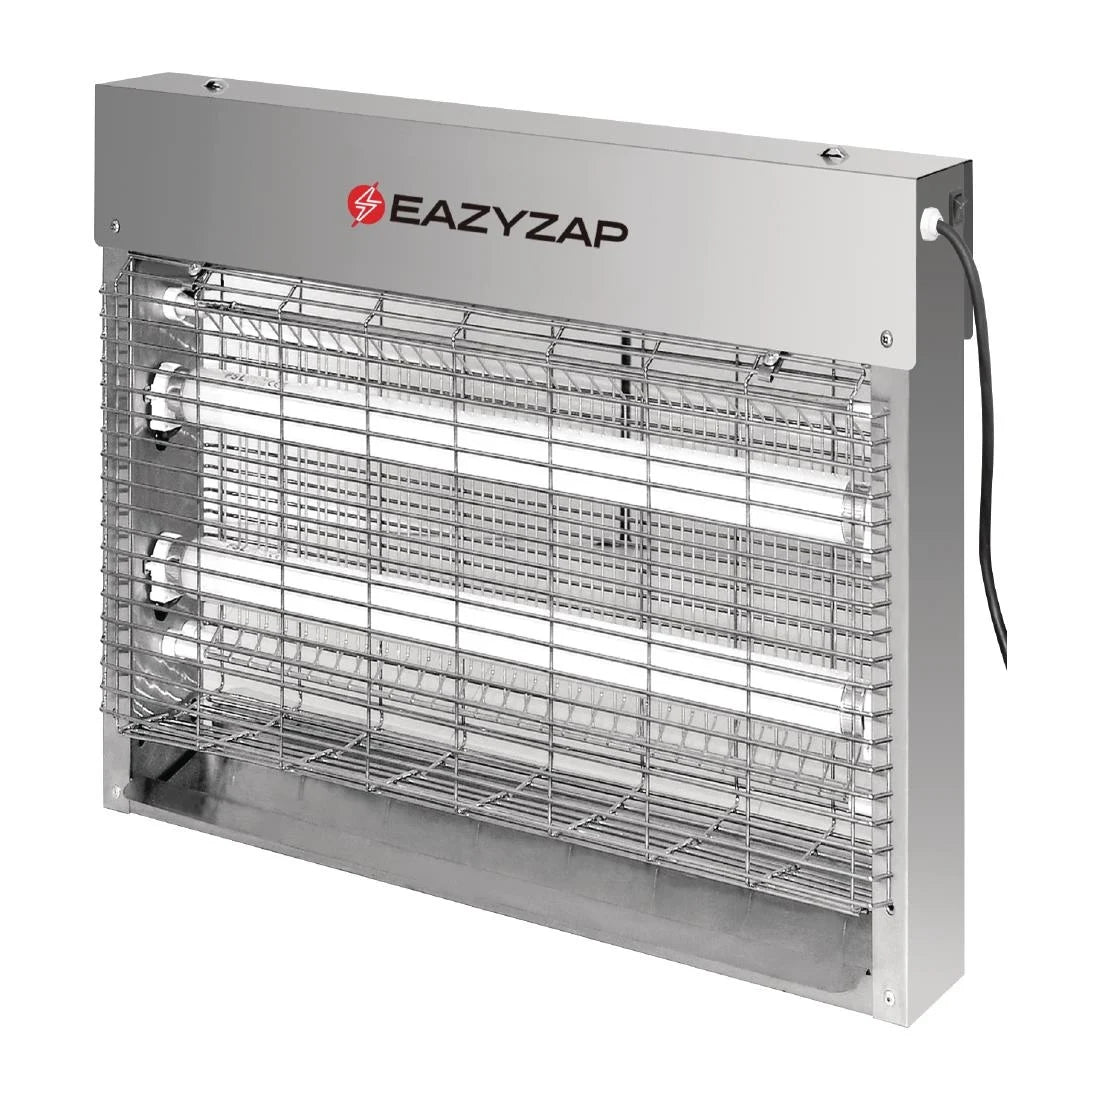 Eazyzap Energy Efficient Stainless Steel LED Fly Killer 30m².Product Ref:00735.Model:FP983. 🚚 3-5 Days Delivery